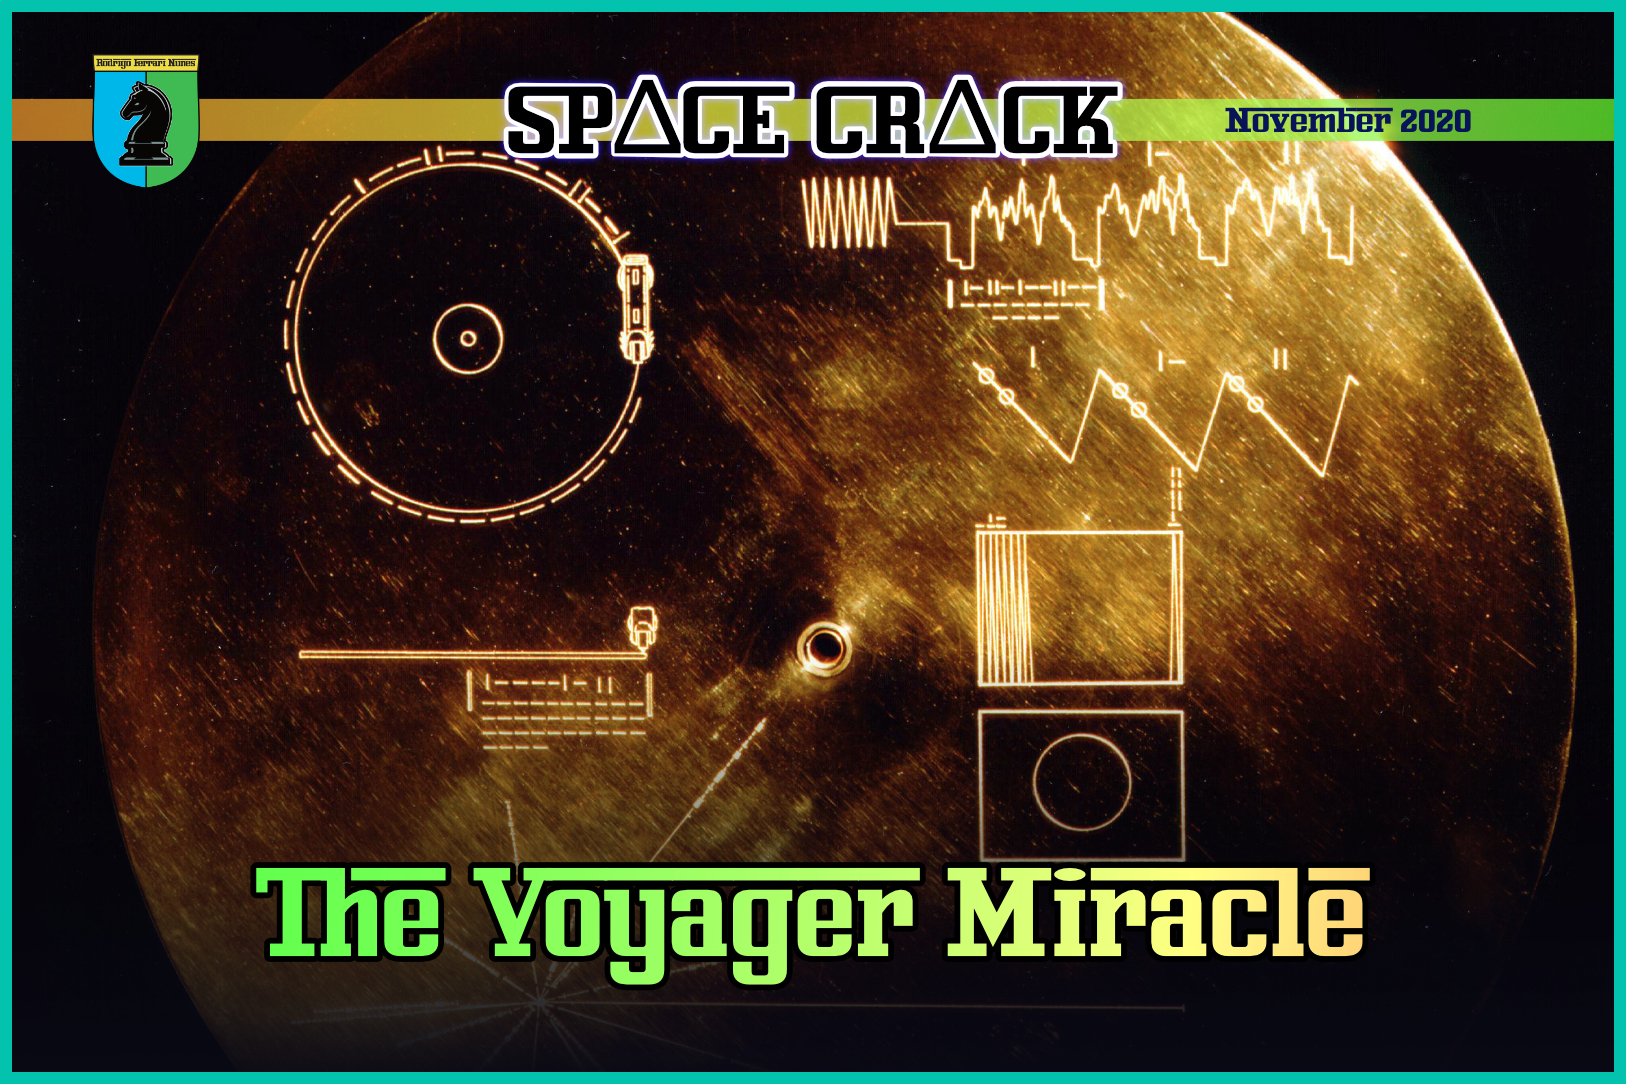 THE VOYAGER MIRACLE